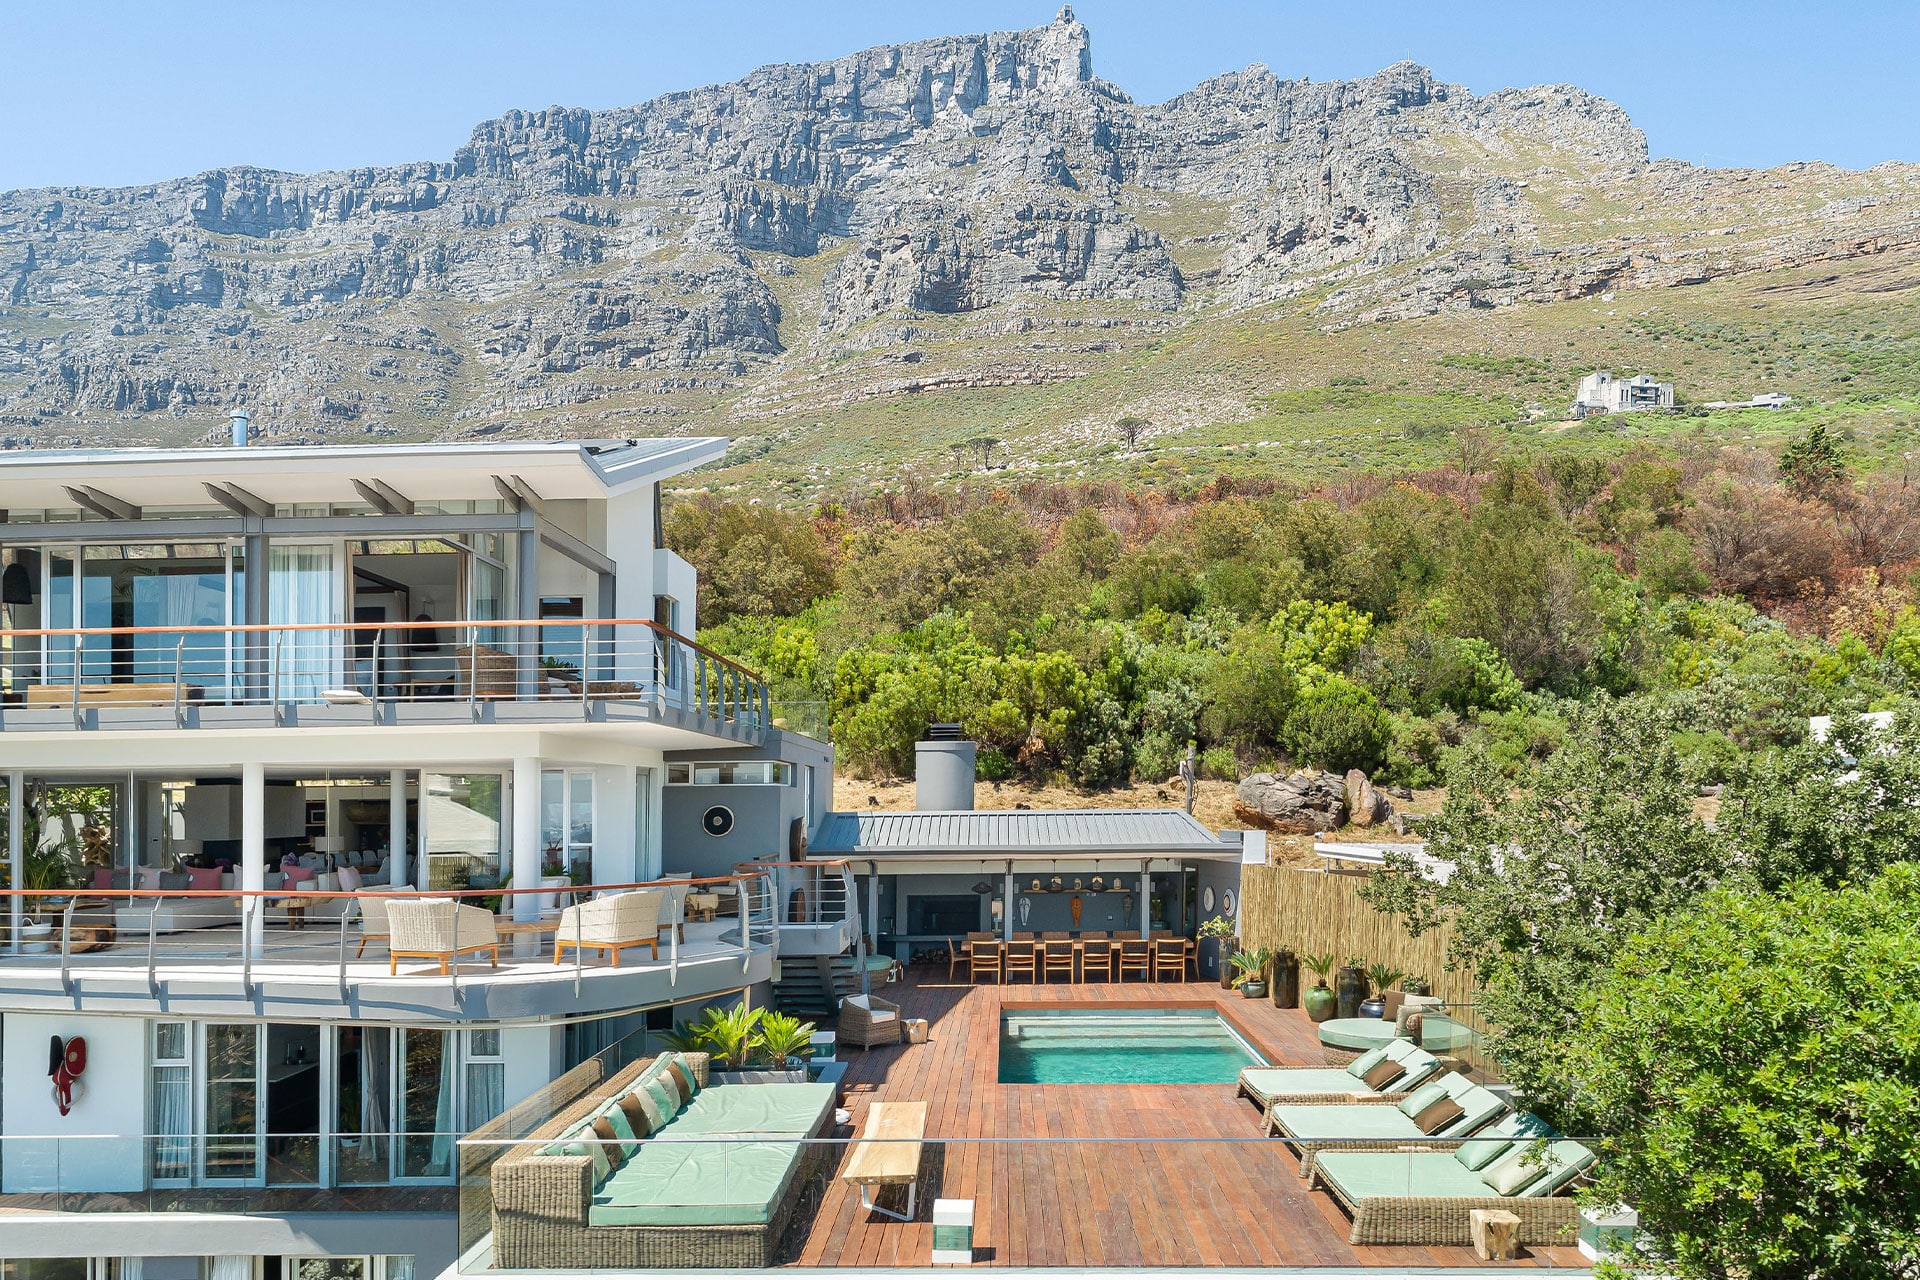 The luxury Residence by Atzaró villa nestled at the foot of Table Mountain in Cape Town, South Africa.